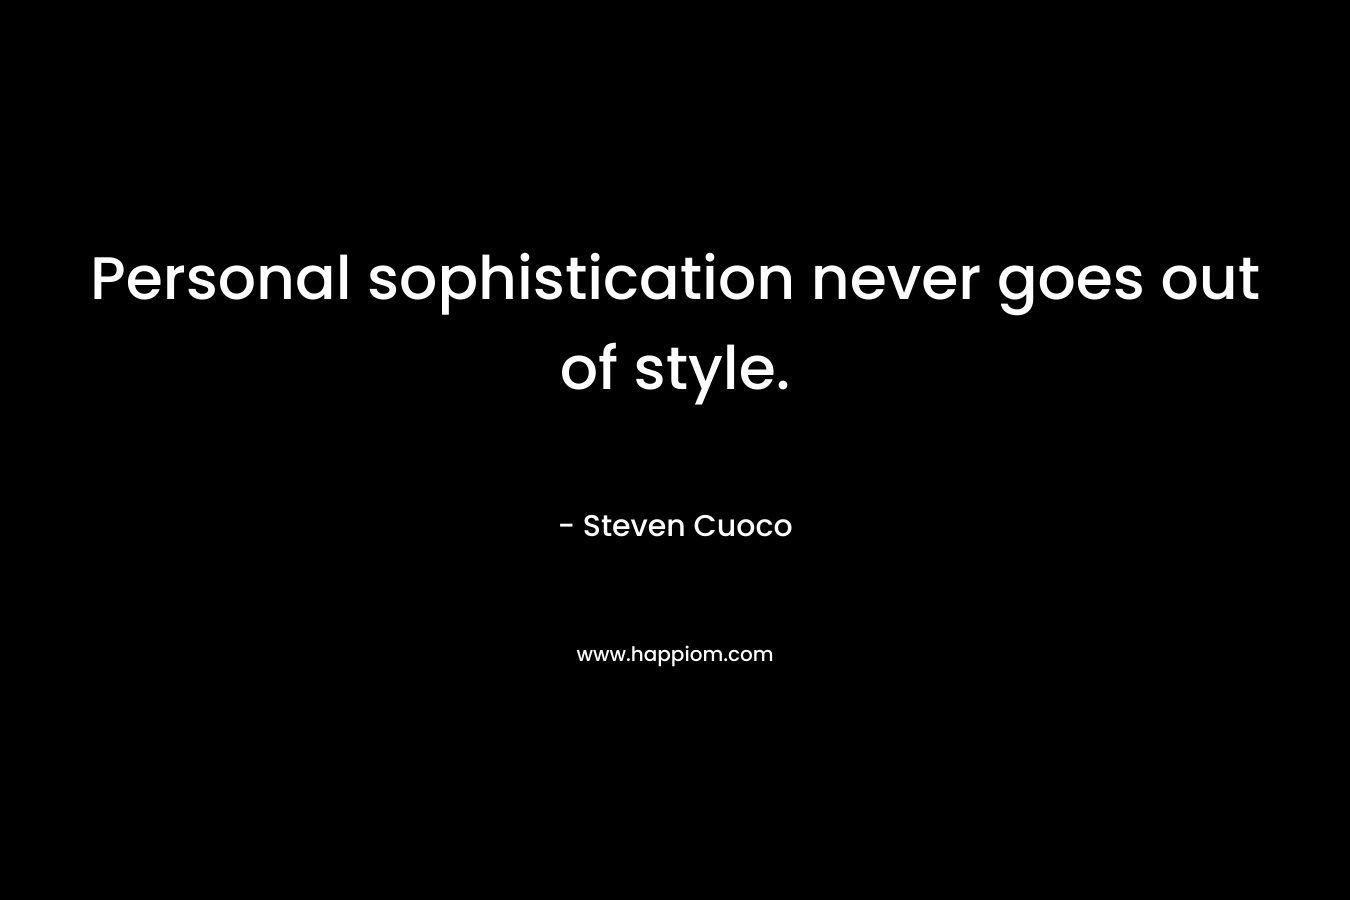 Personal sophistication never goes out of style.